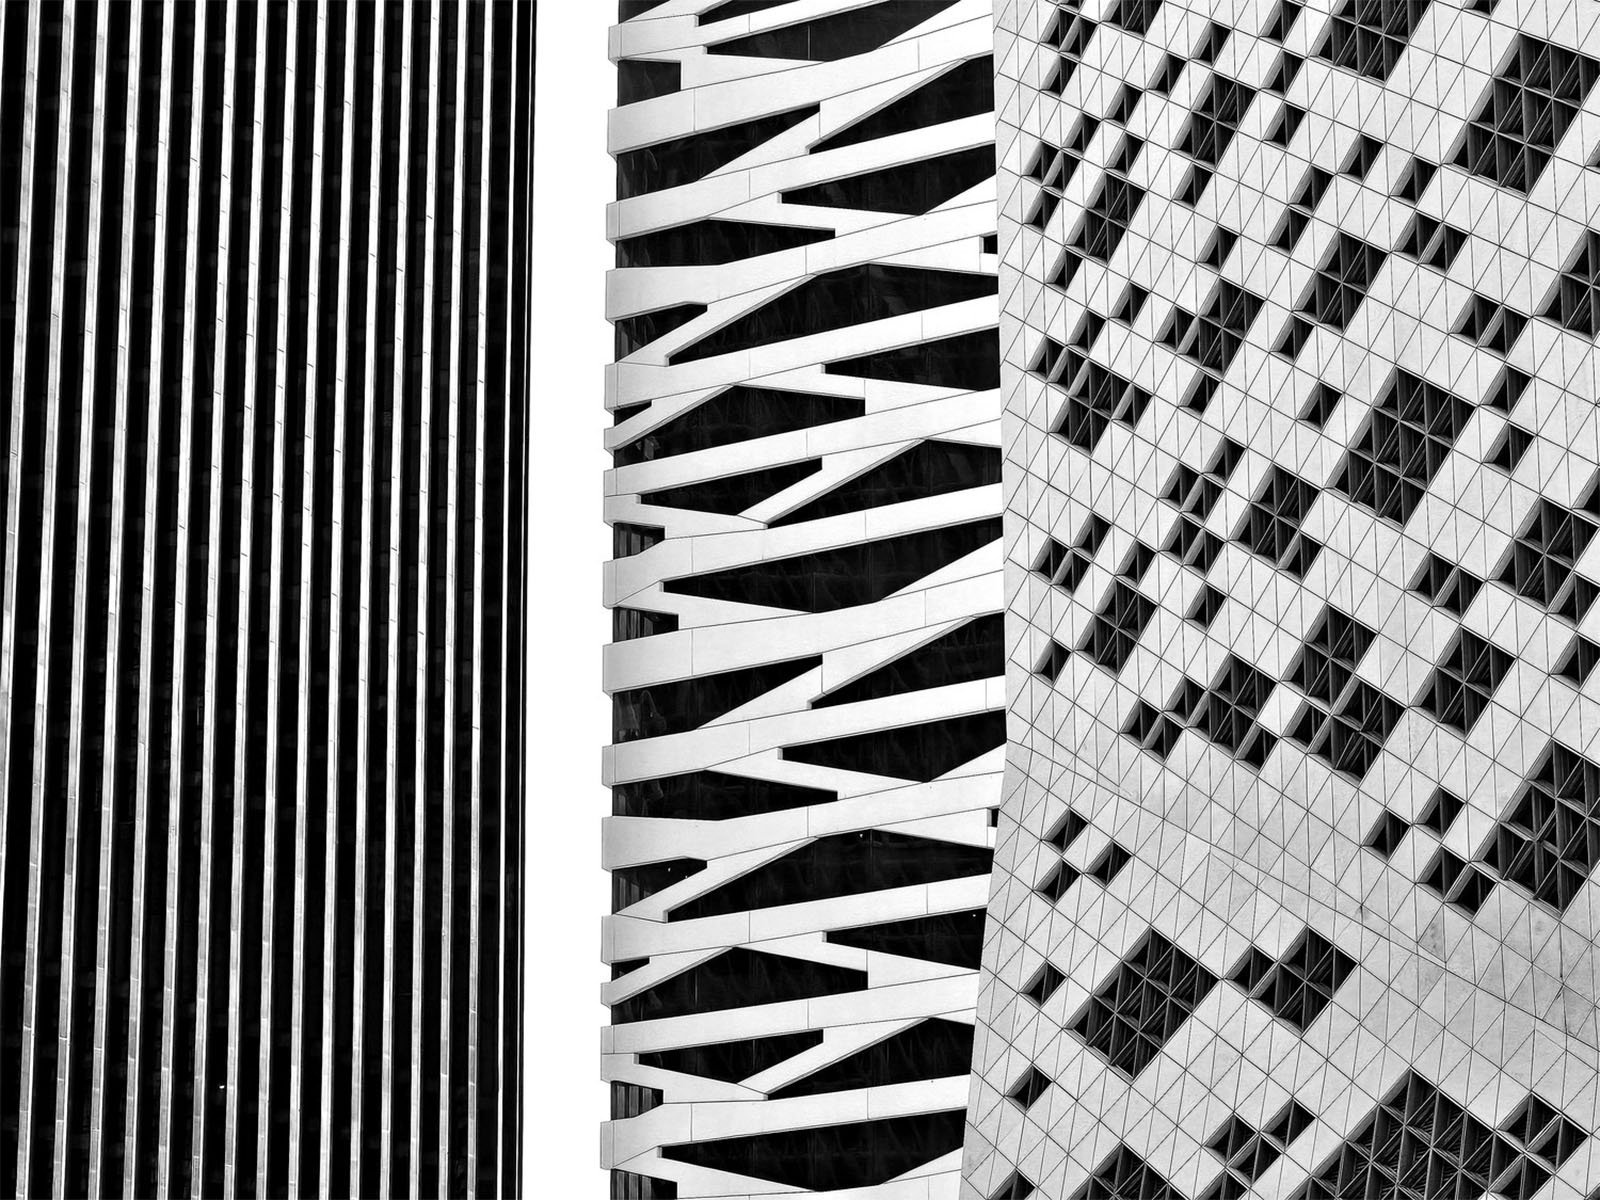 A black and white image featuring three modern high-rise buildings with distinct architectural designs. The left building has vertical stripes, the middle building has diagonal crisscross patterns, and the right building has an abstract, textured facade.